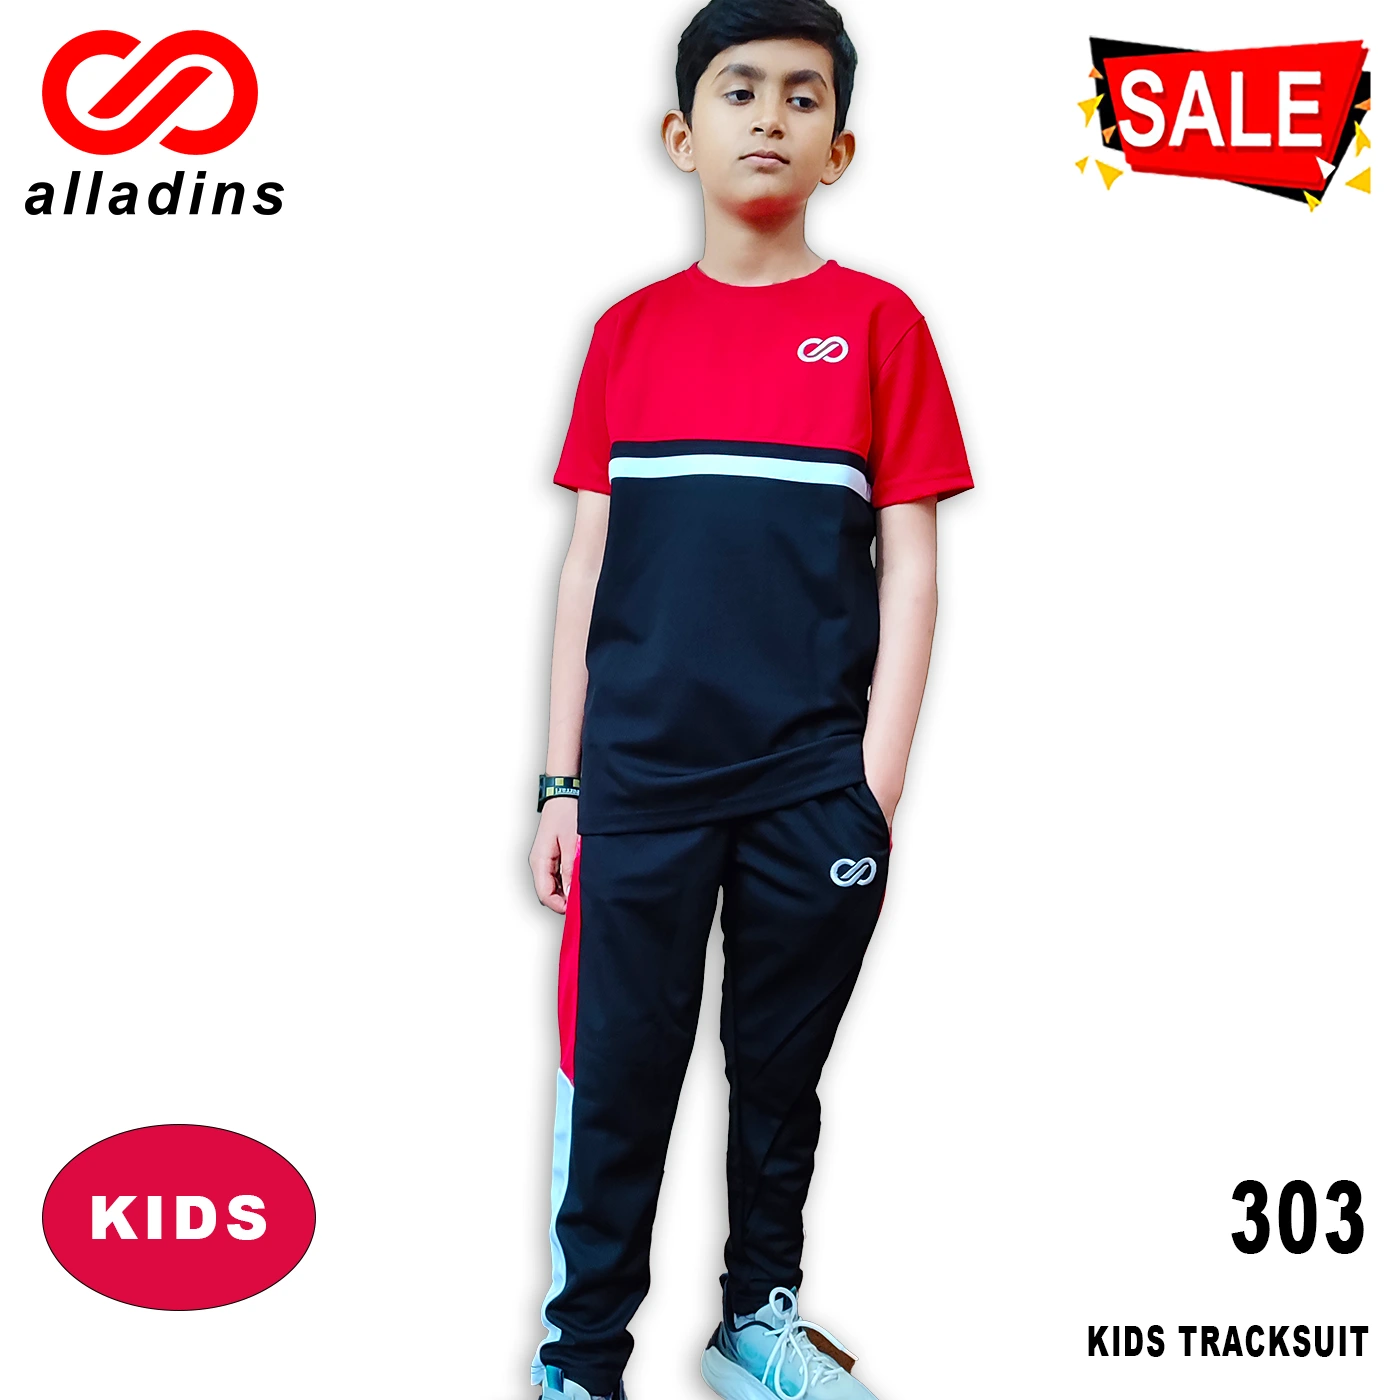 303 KIDS Tracksuit Red Navy Blue 